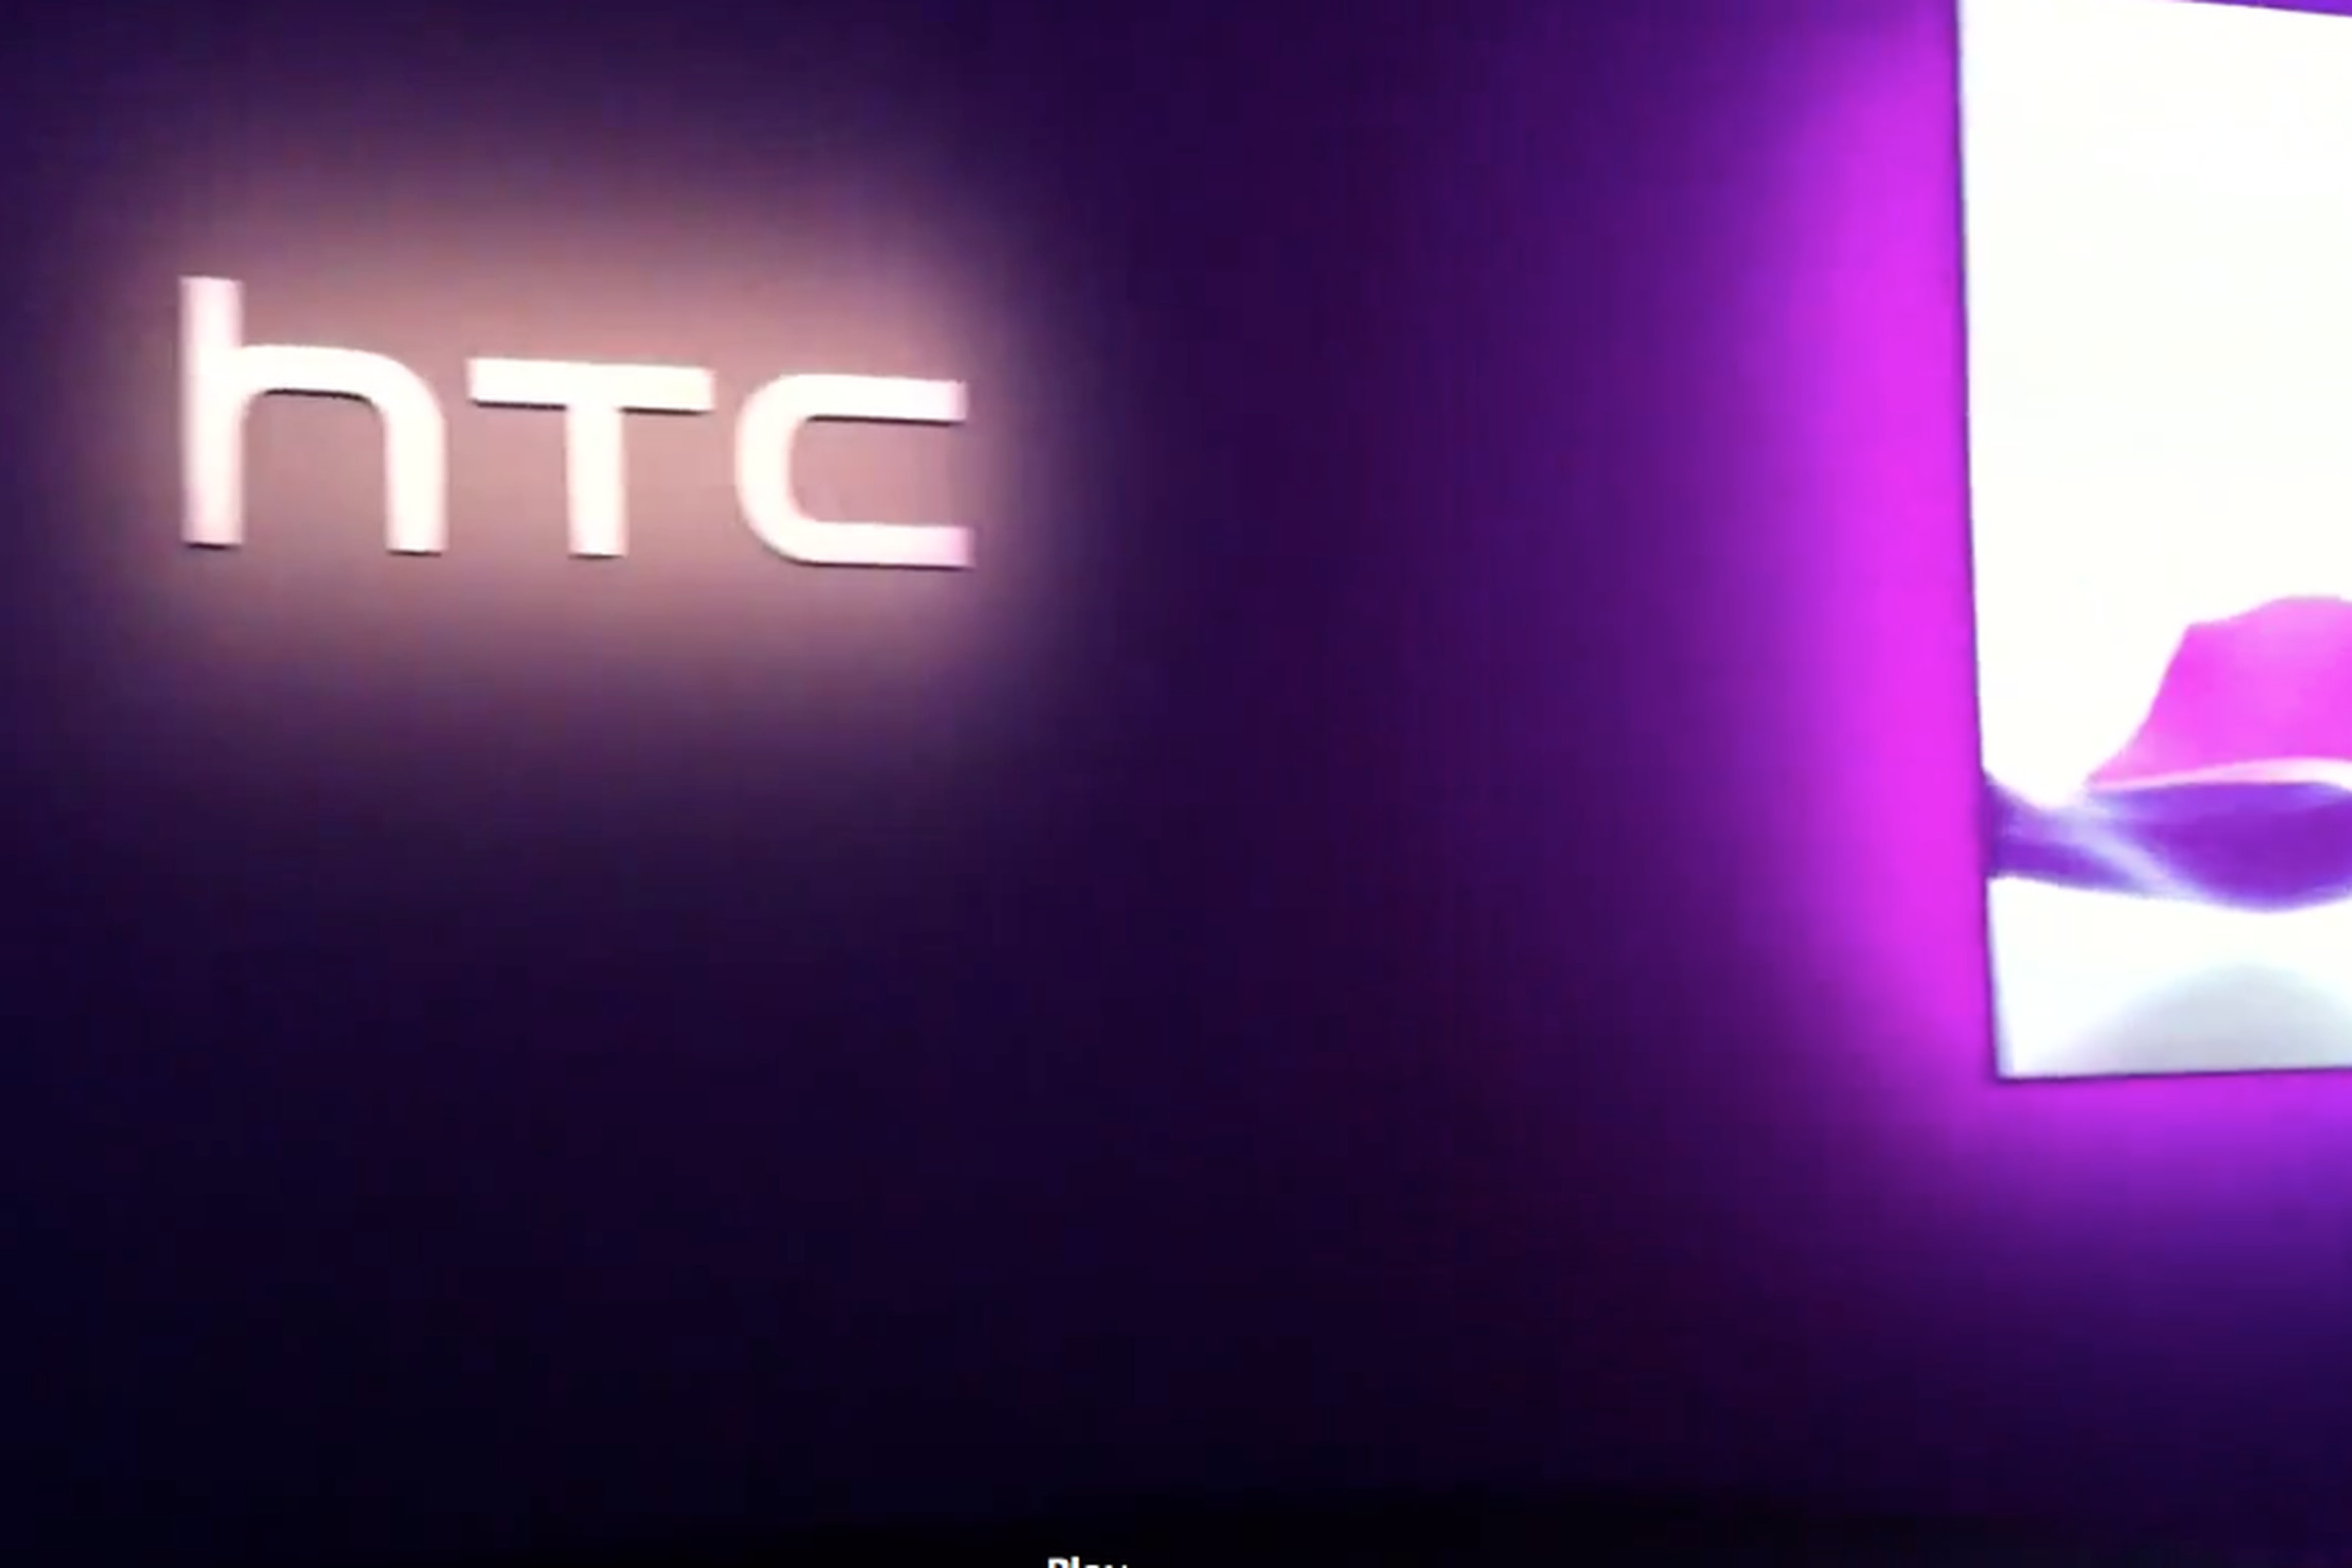 Live from HTC event